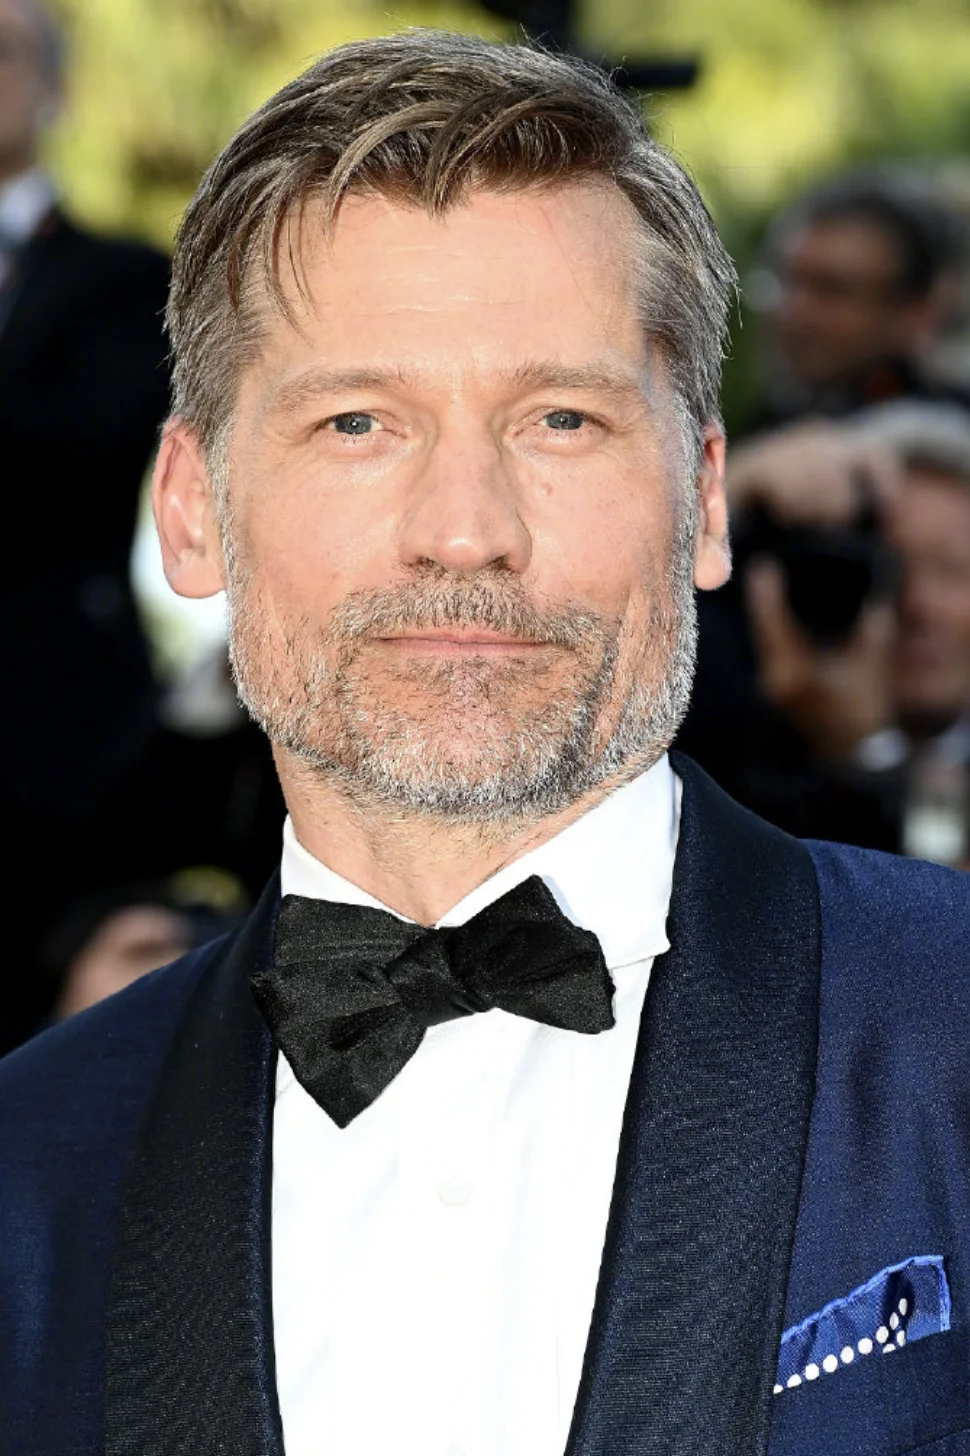 Nikolaj Coster-Waldau on the red carpet at the Cannes Film Festival